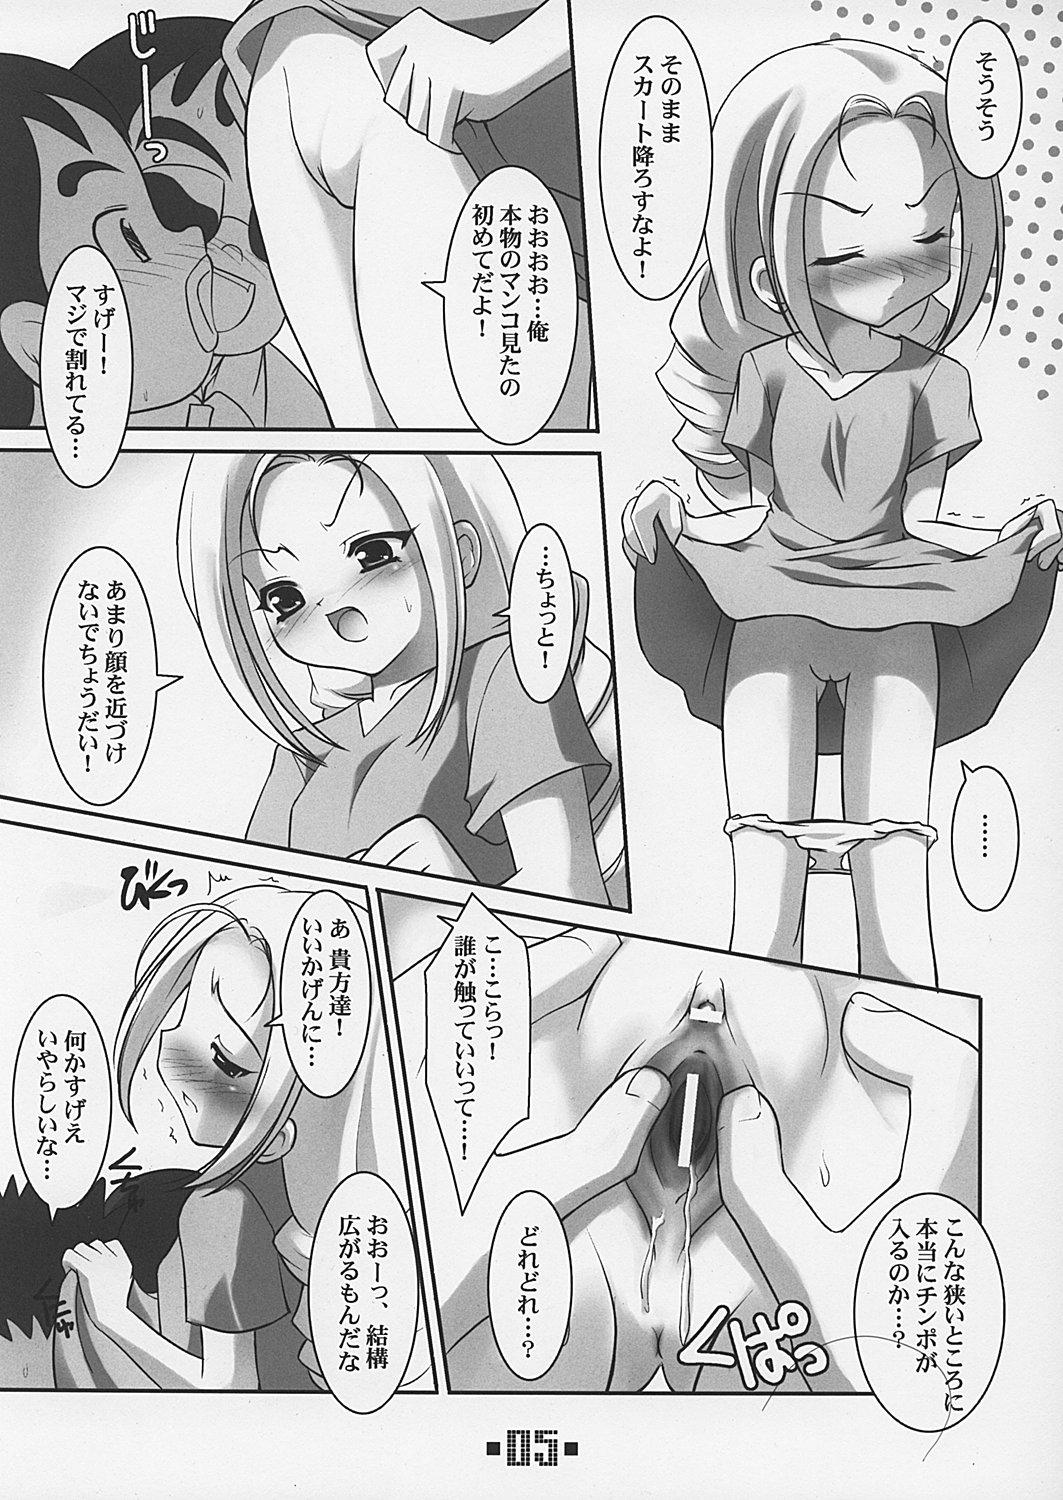 Lolicon DELTA PETIT - Ojamajo doremi Whipping - Page 5